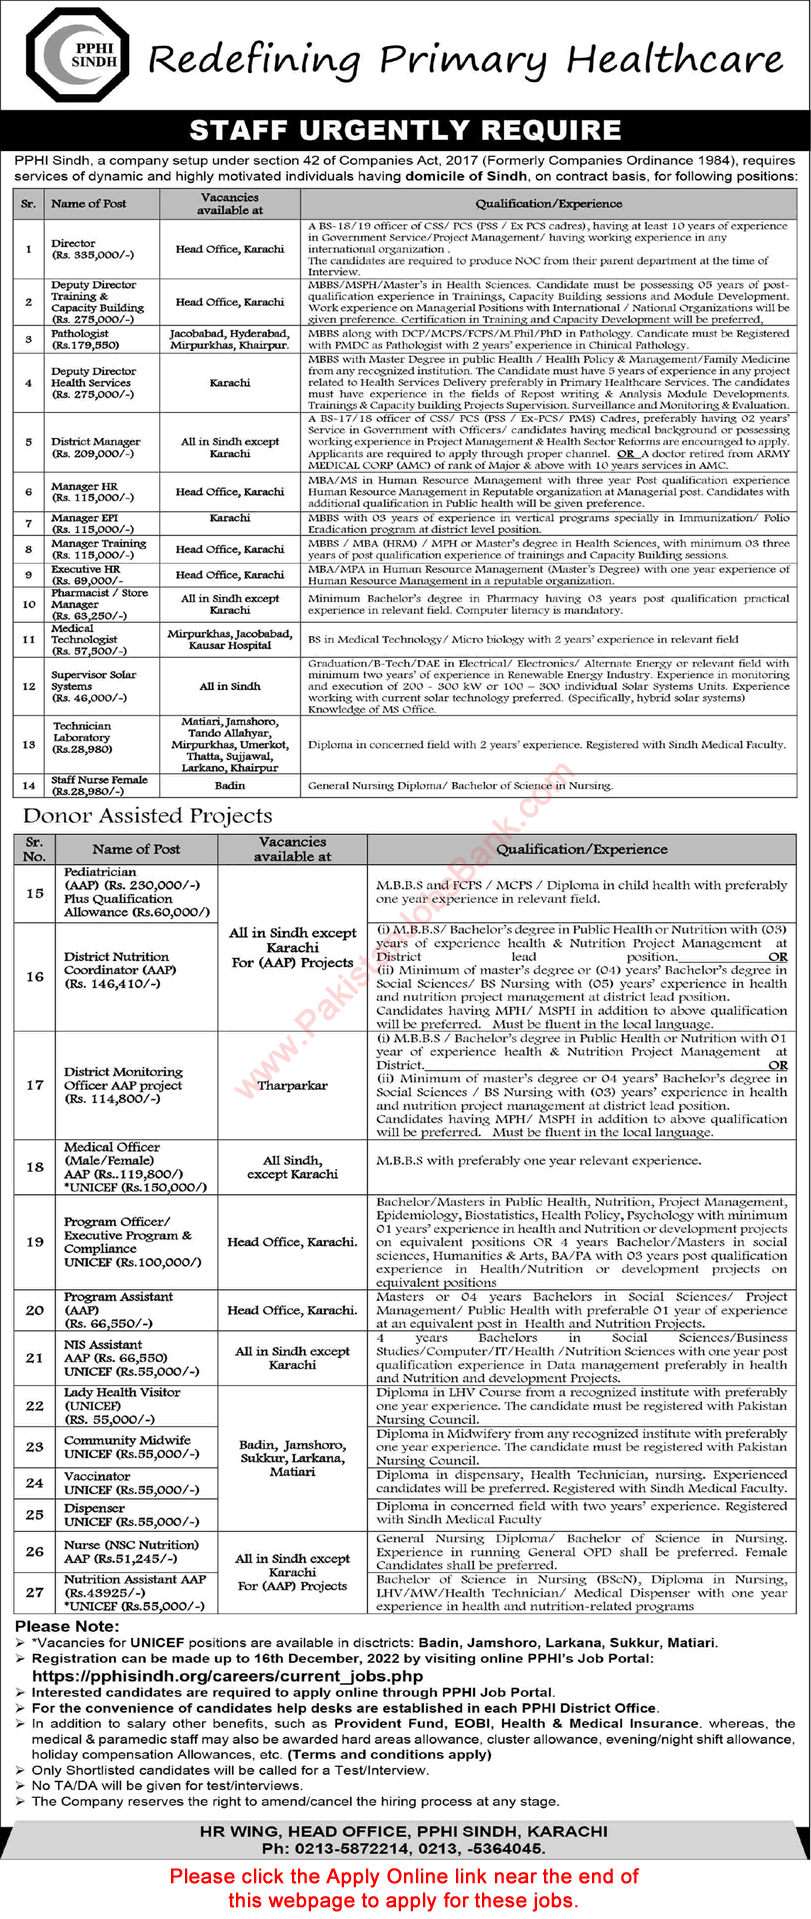 PPHI Sindh Jobs December 2022 Online Apply People's Primary Healthcare Initiative Latest